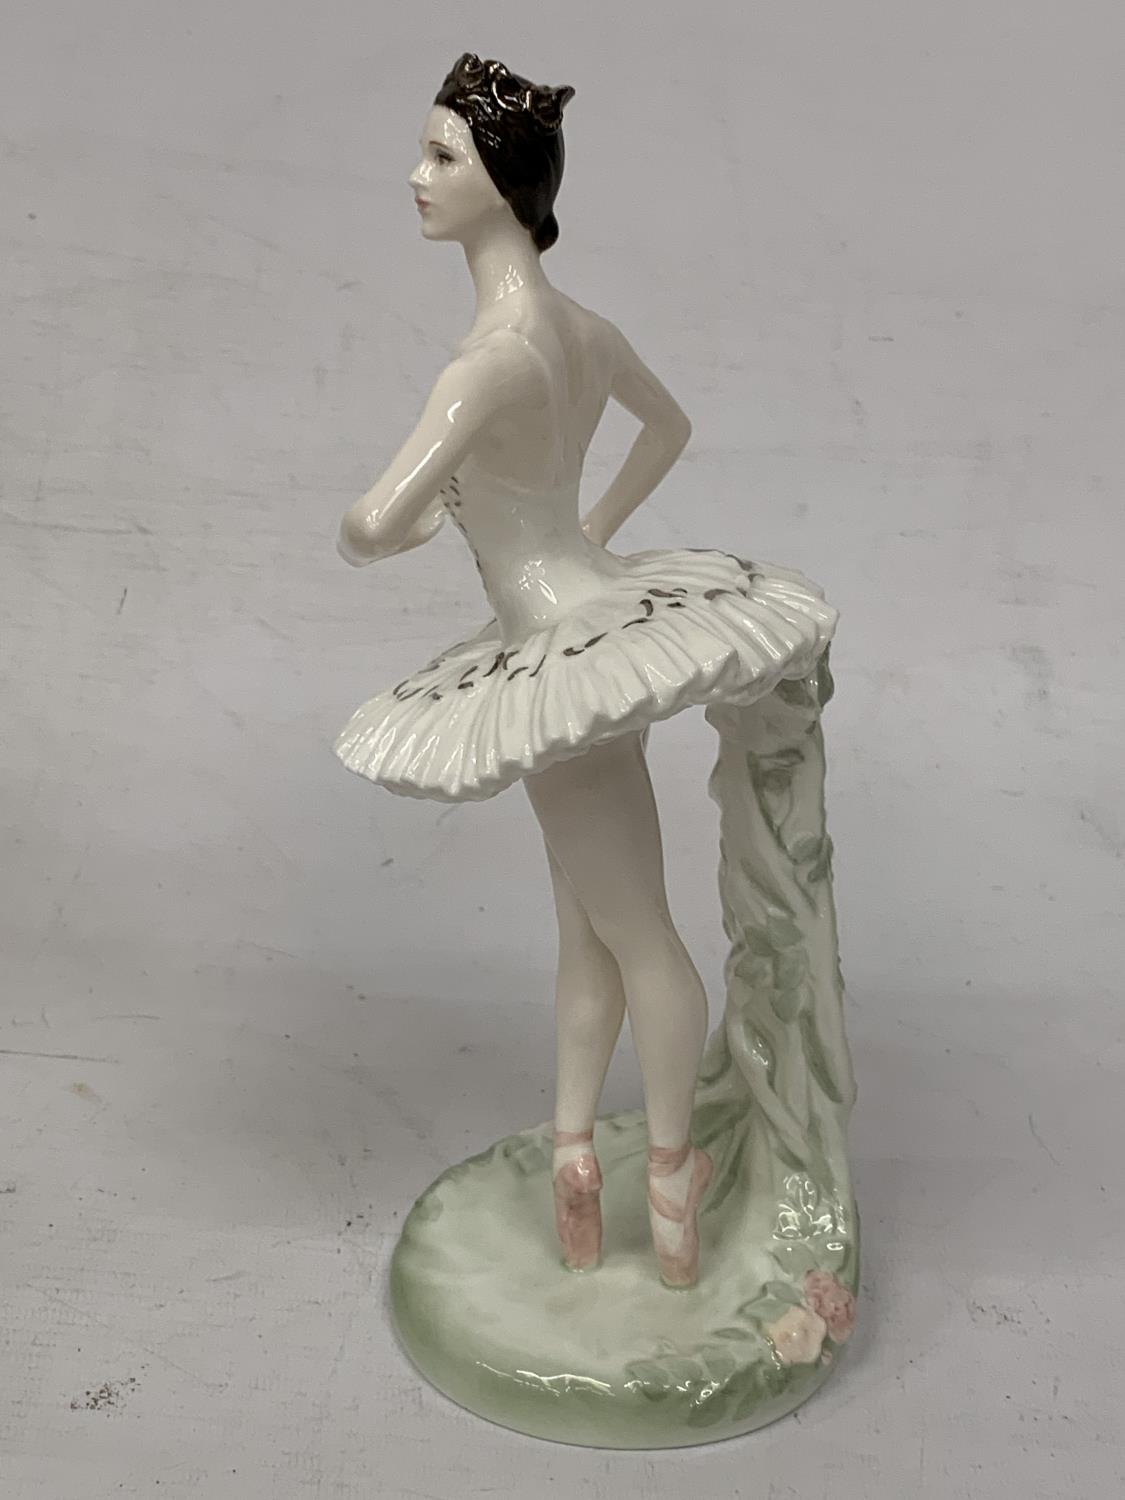 A COALPORT FIGURINE "DAME BERYL GREY" FROM THE ROYAL ACADEMY OF DANCING COLLECTION CELEBRATING THE - Image 2 of 5